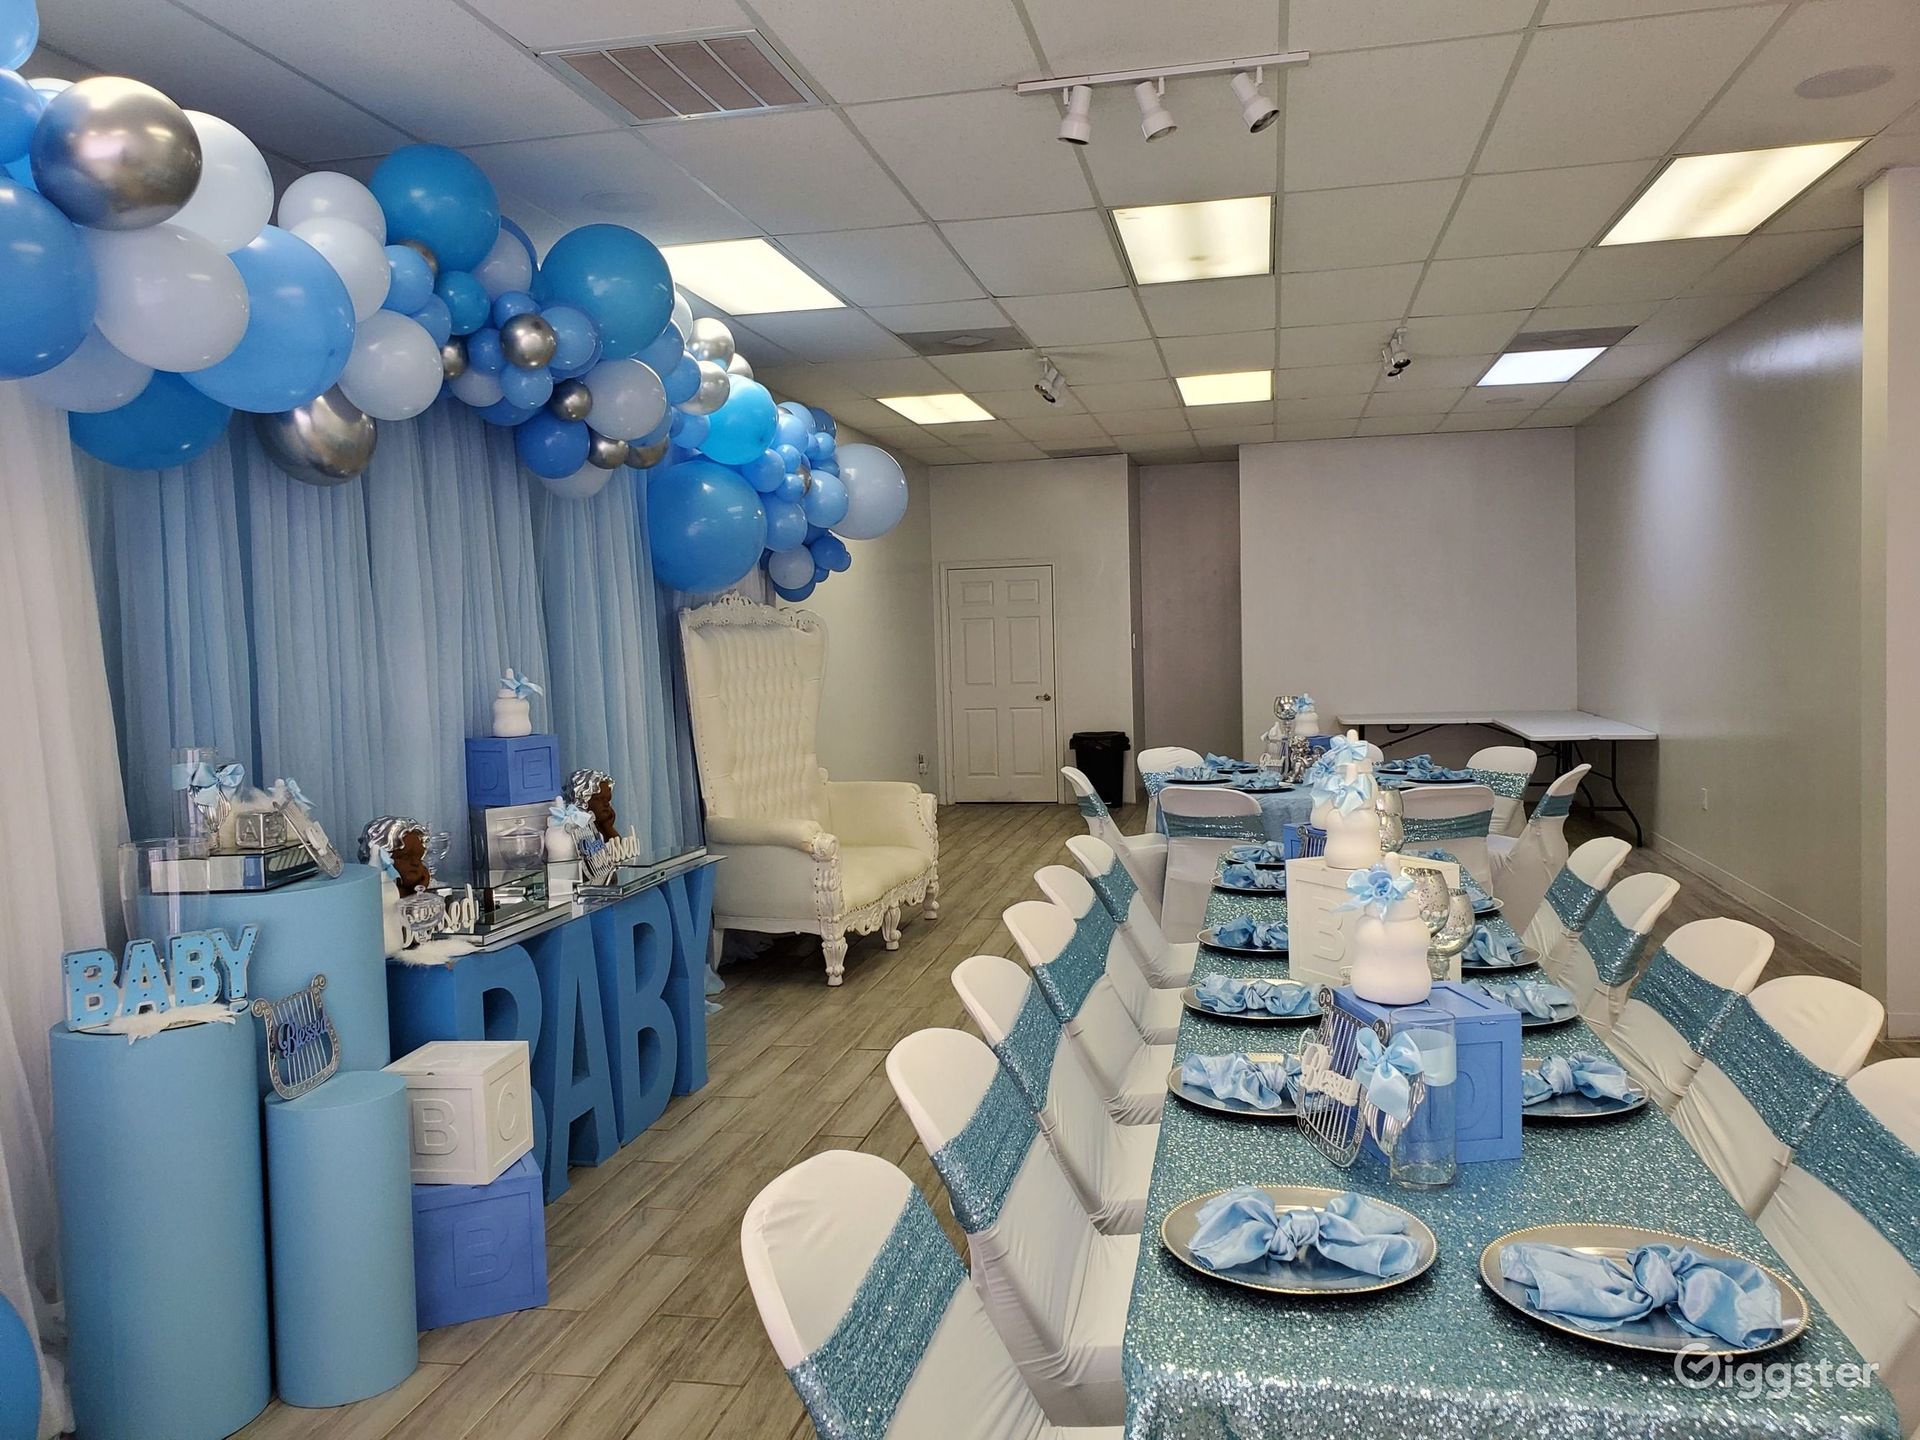 places to hold baby shower near me